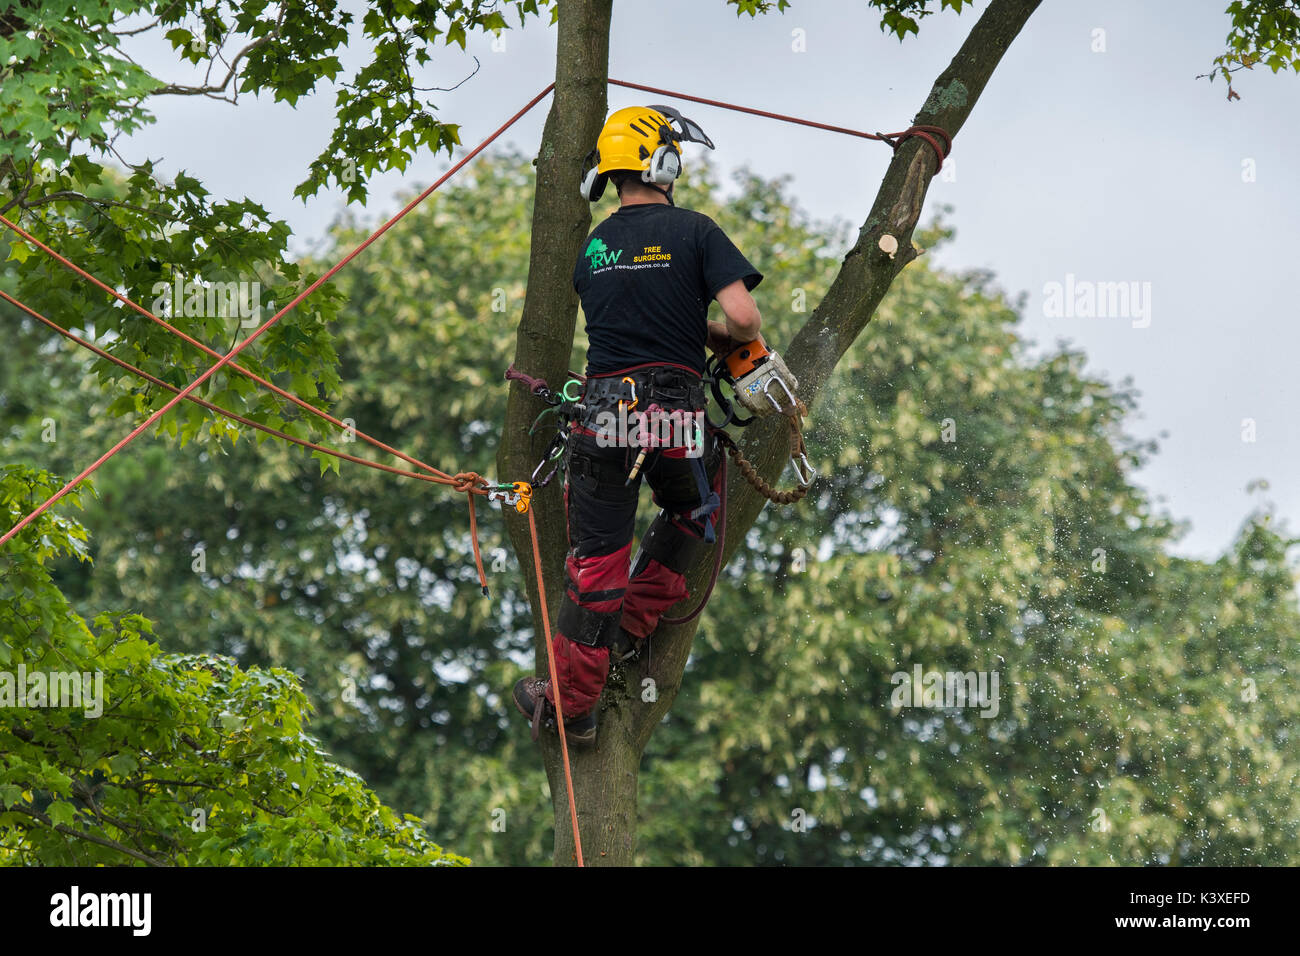 Tree surgeon working in protective gear, using climbing ropes for safety & holding chainsaw, high in branches of garden tree - Yorkshire, England, UK. Stock Photo